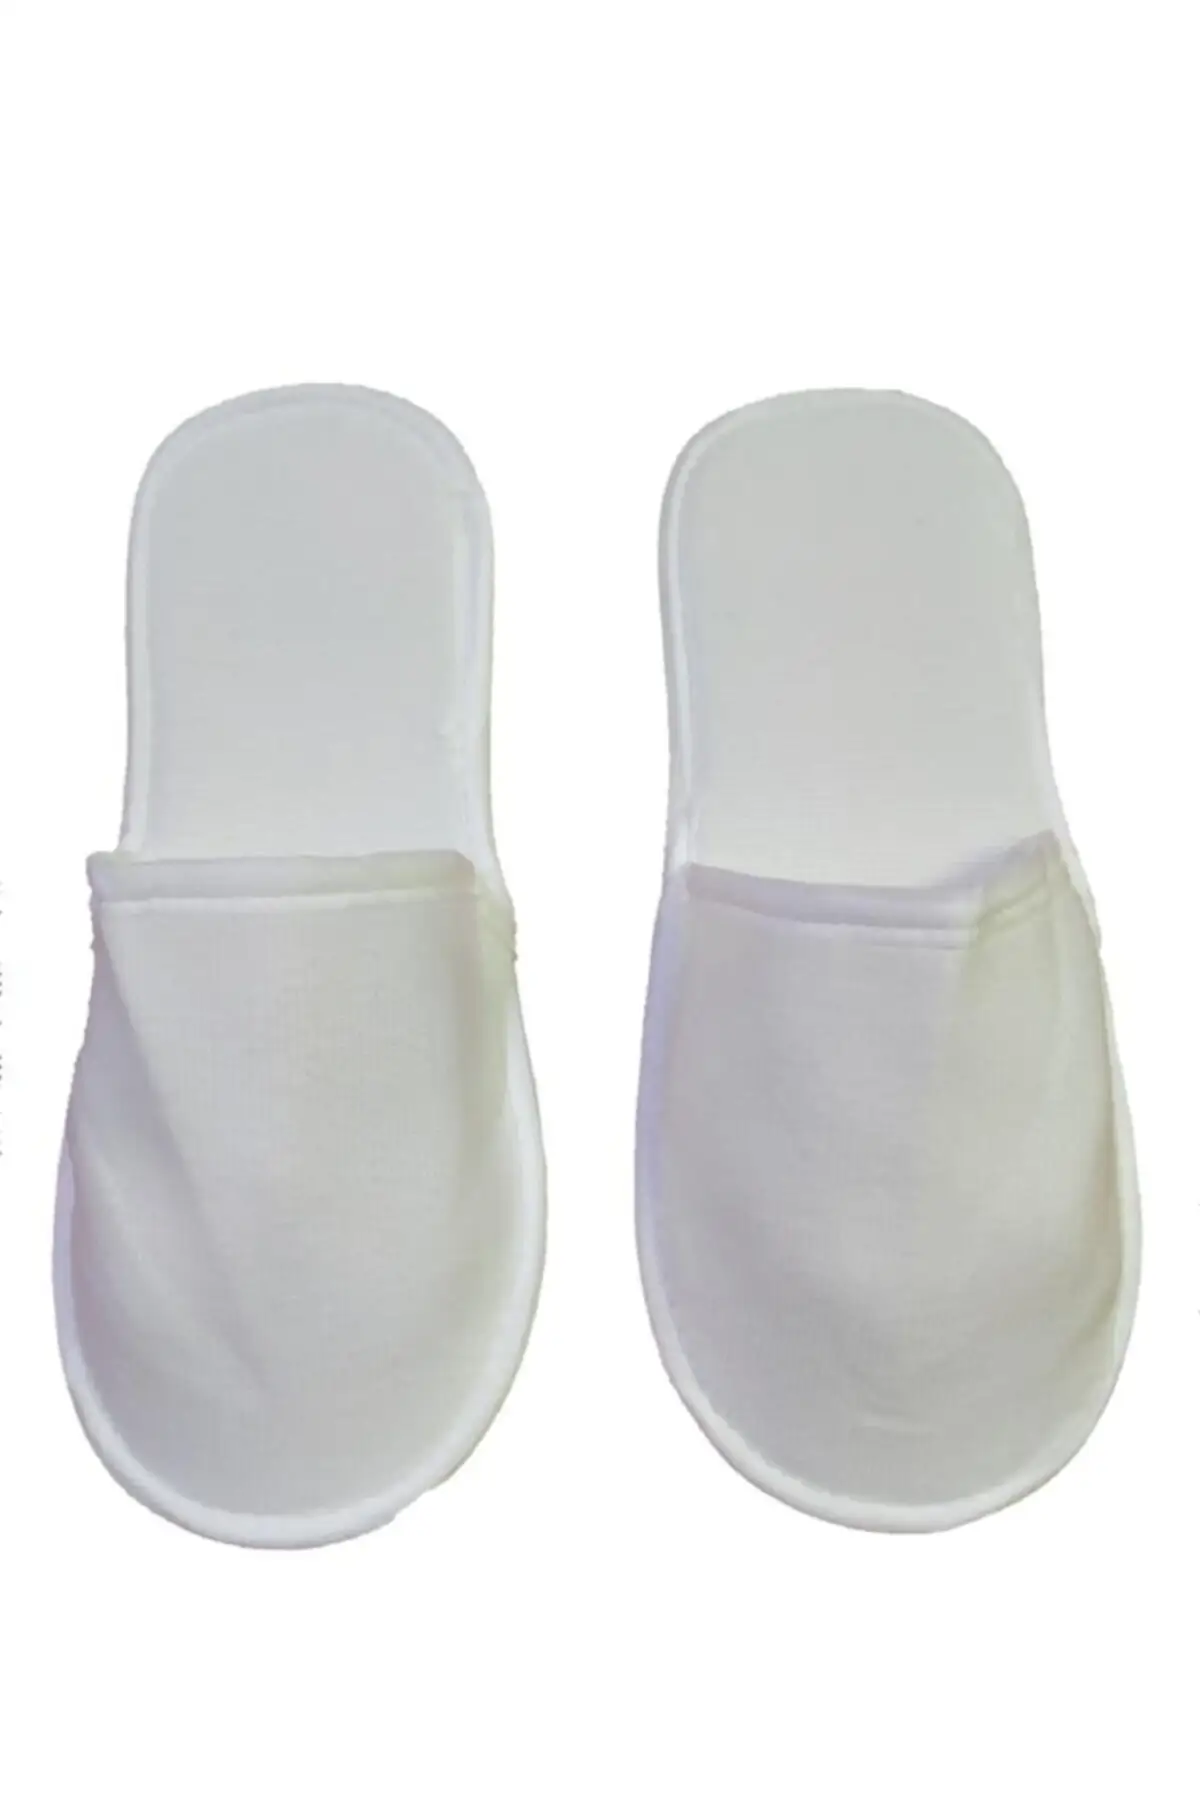 

First Quality Disposable Hotel Slippers 80 Gr Towel 100 Pairs